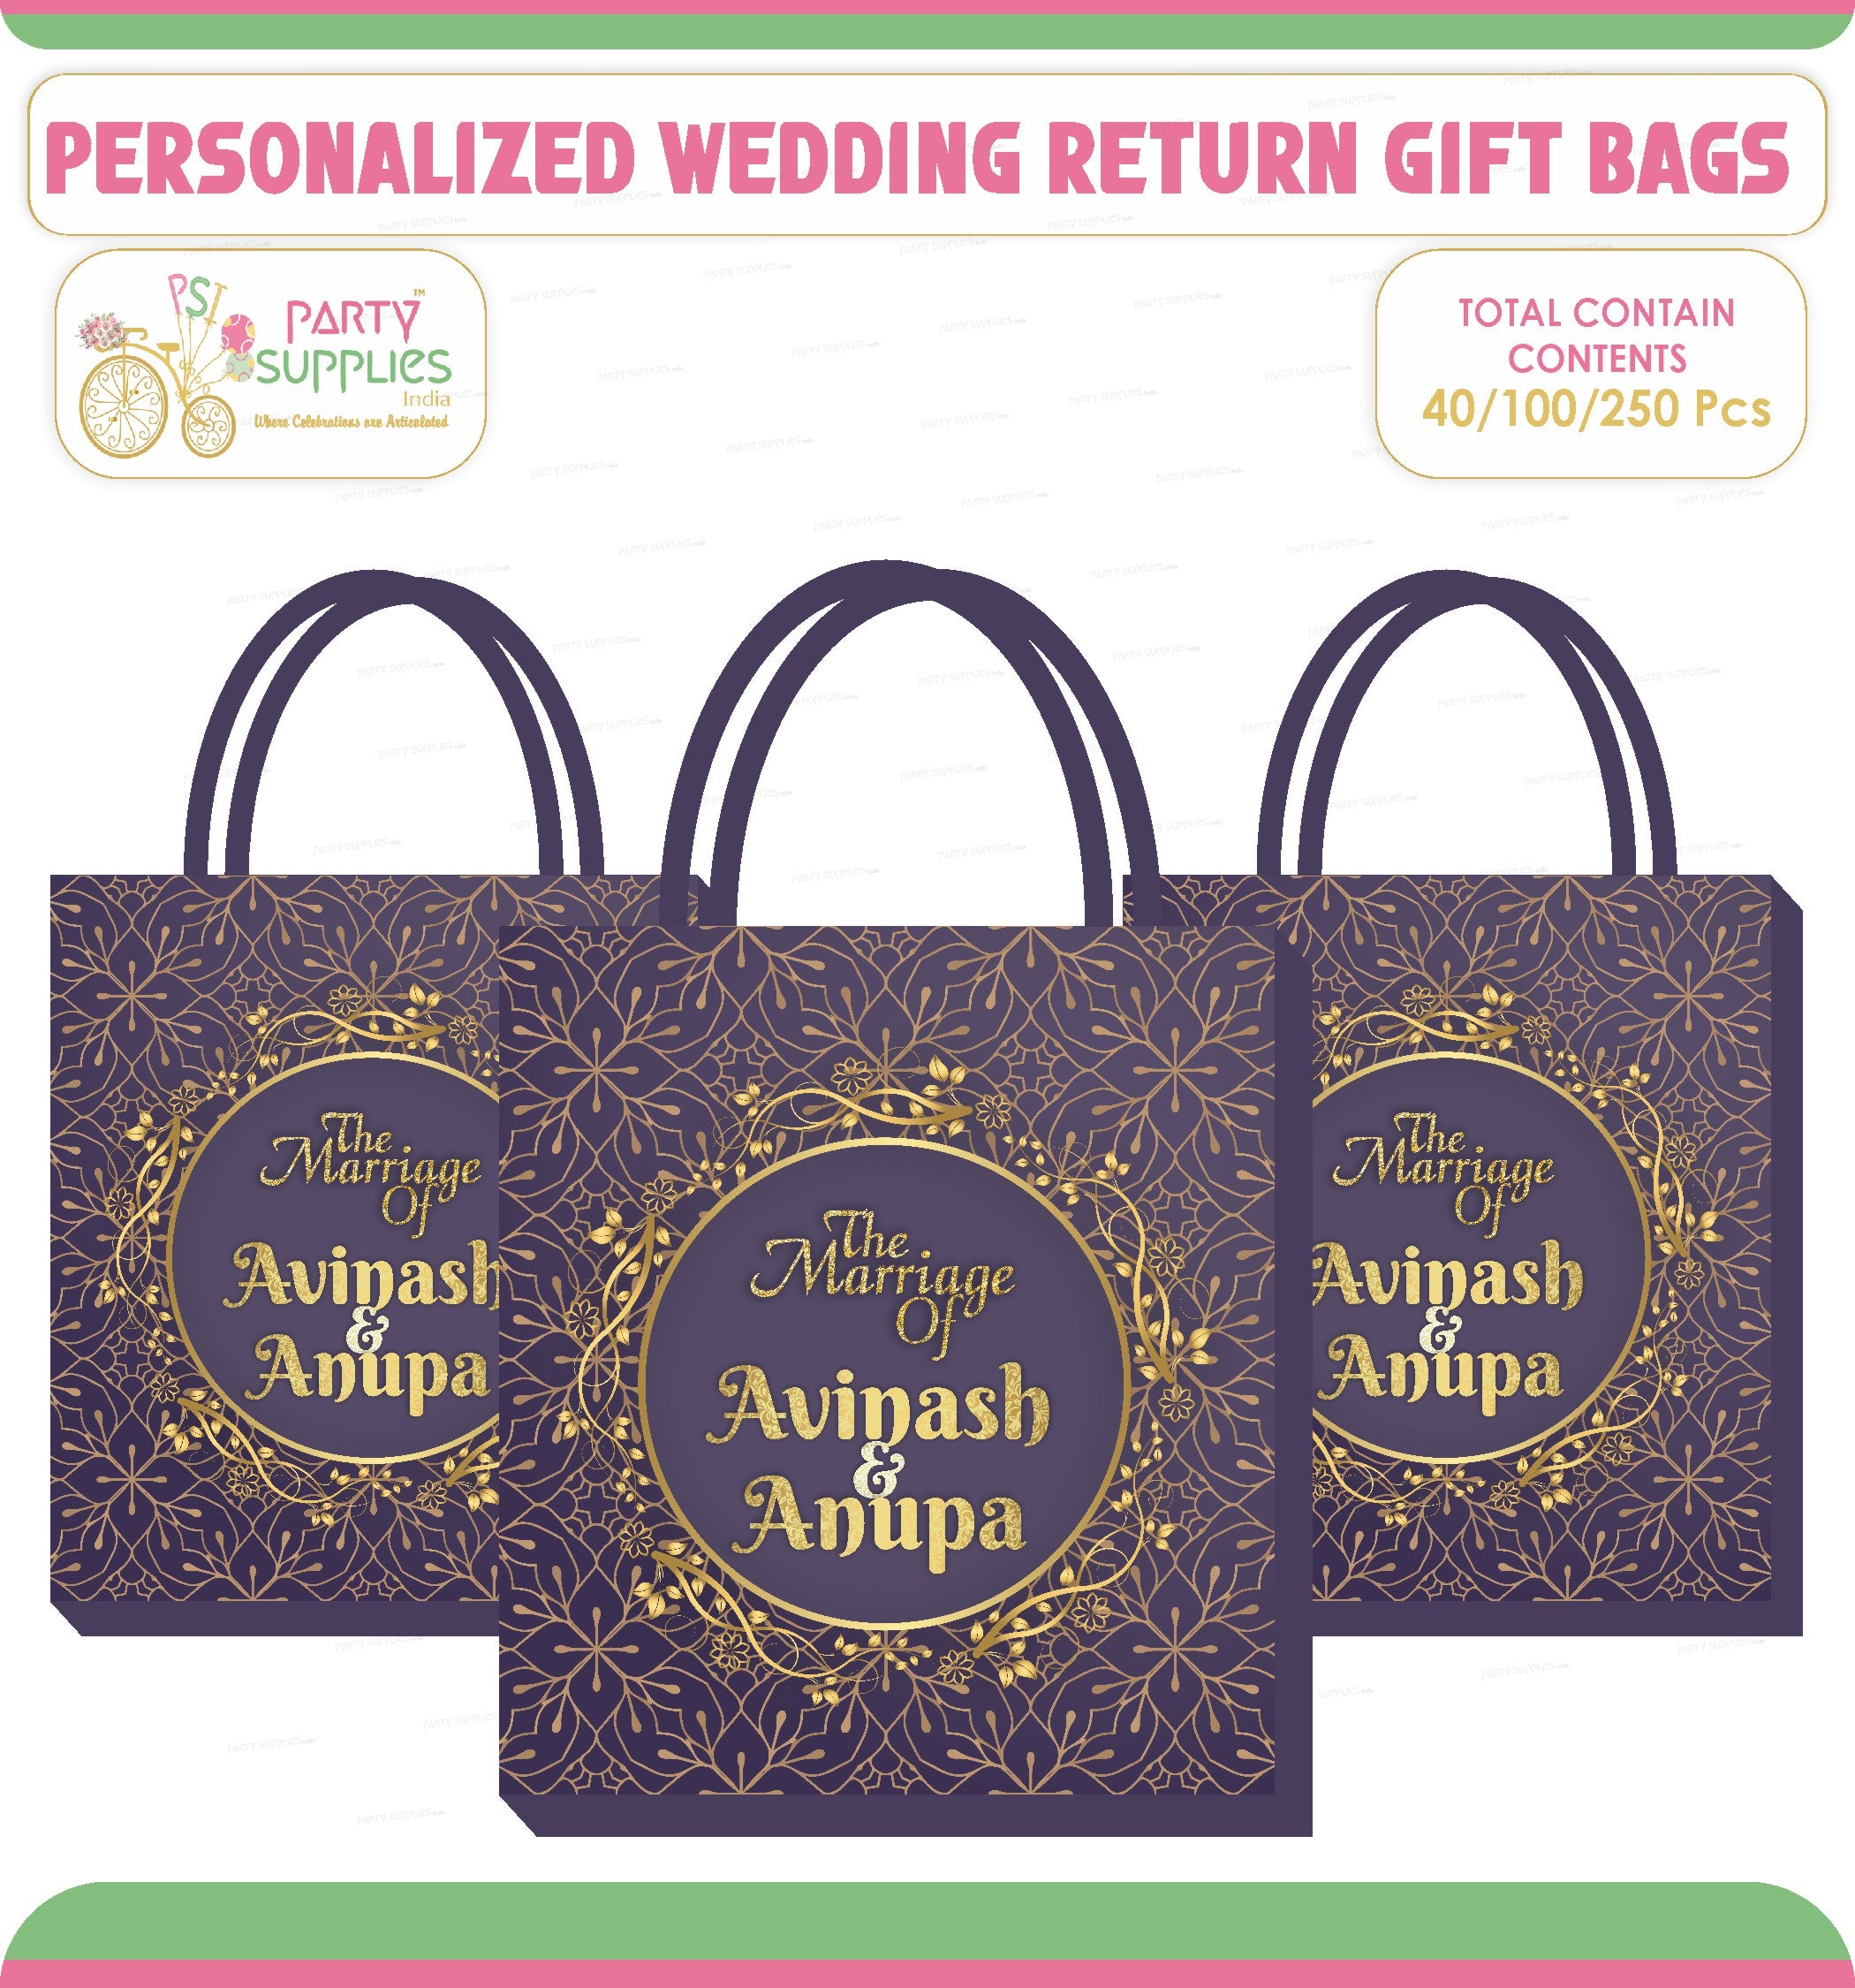 Shop Personalized gifts box Online in India at Nutcaseshop.com